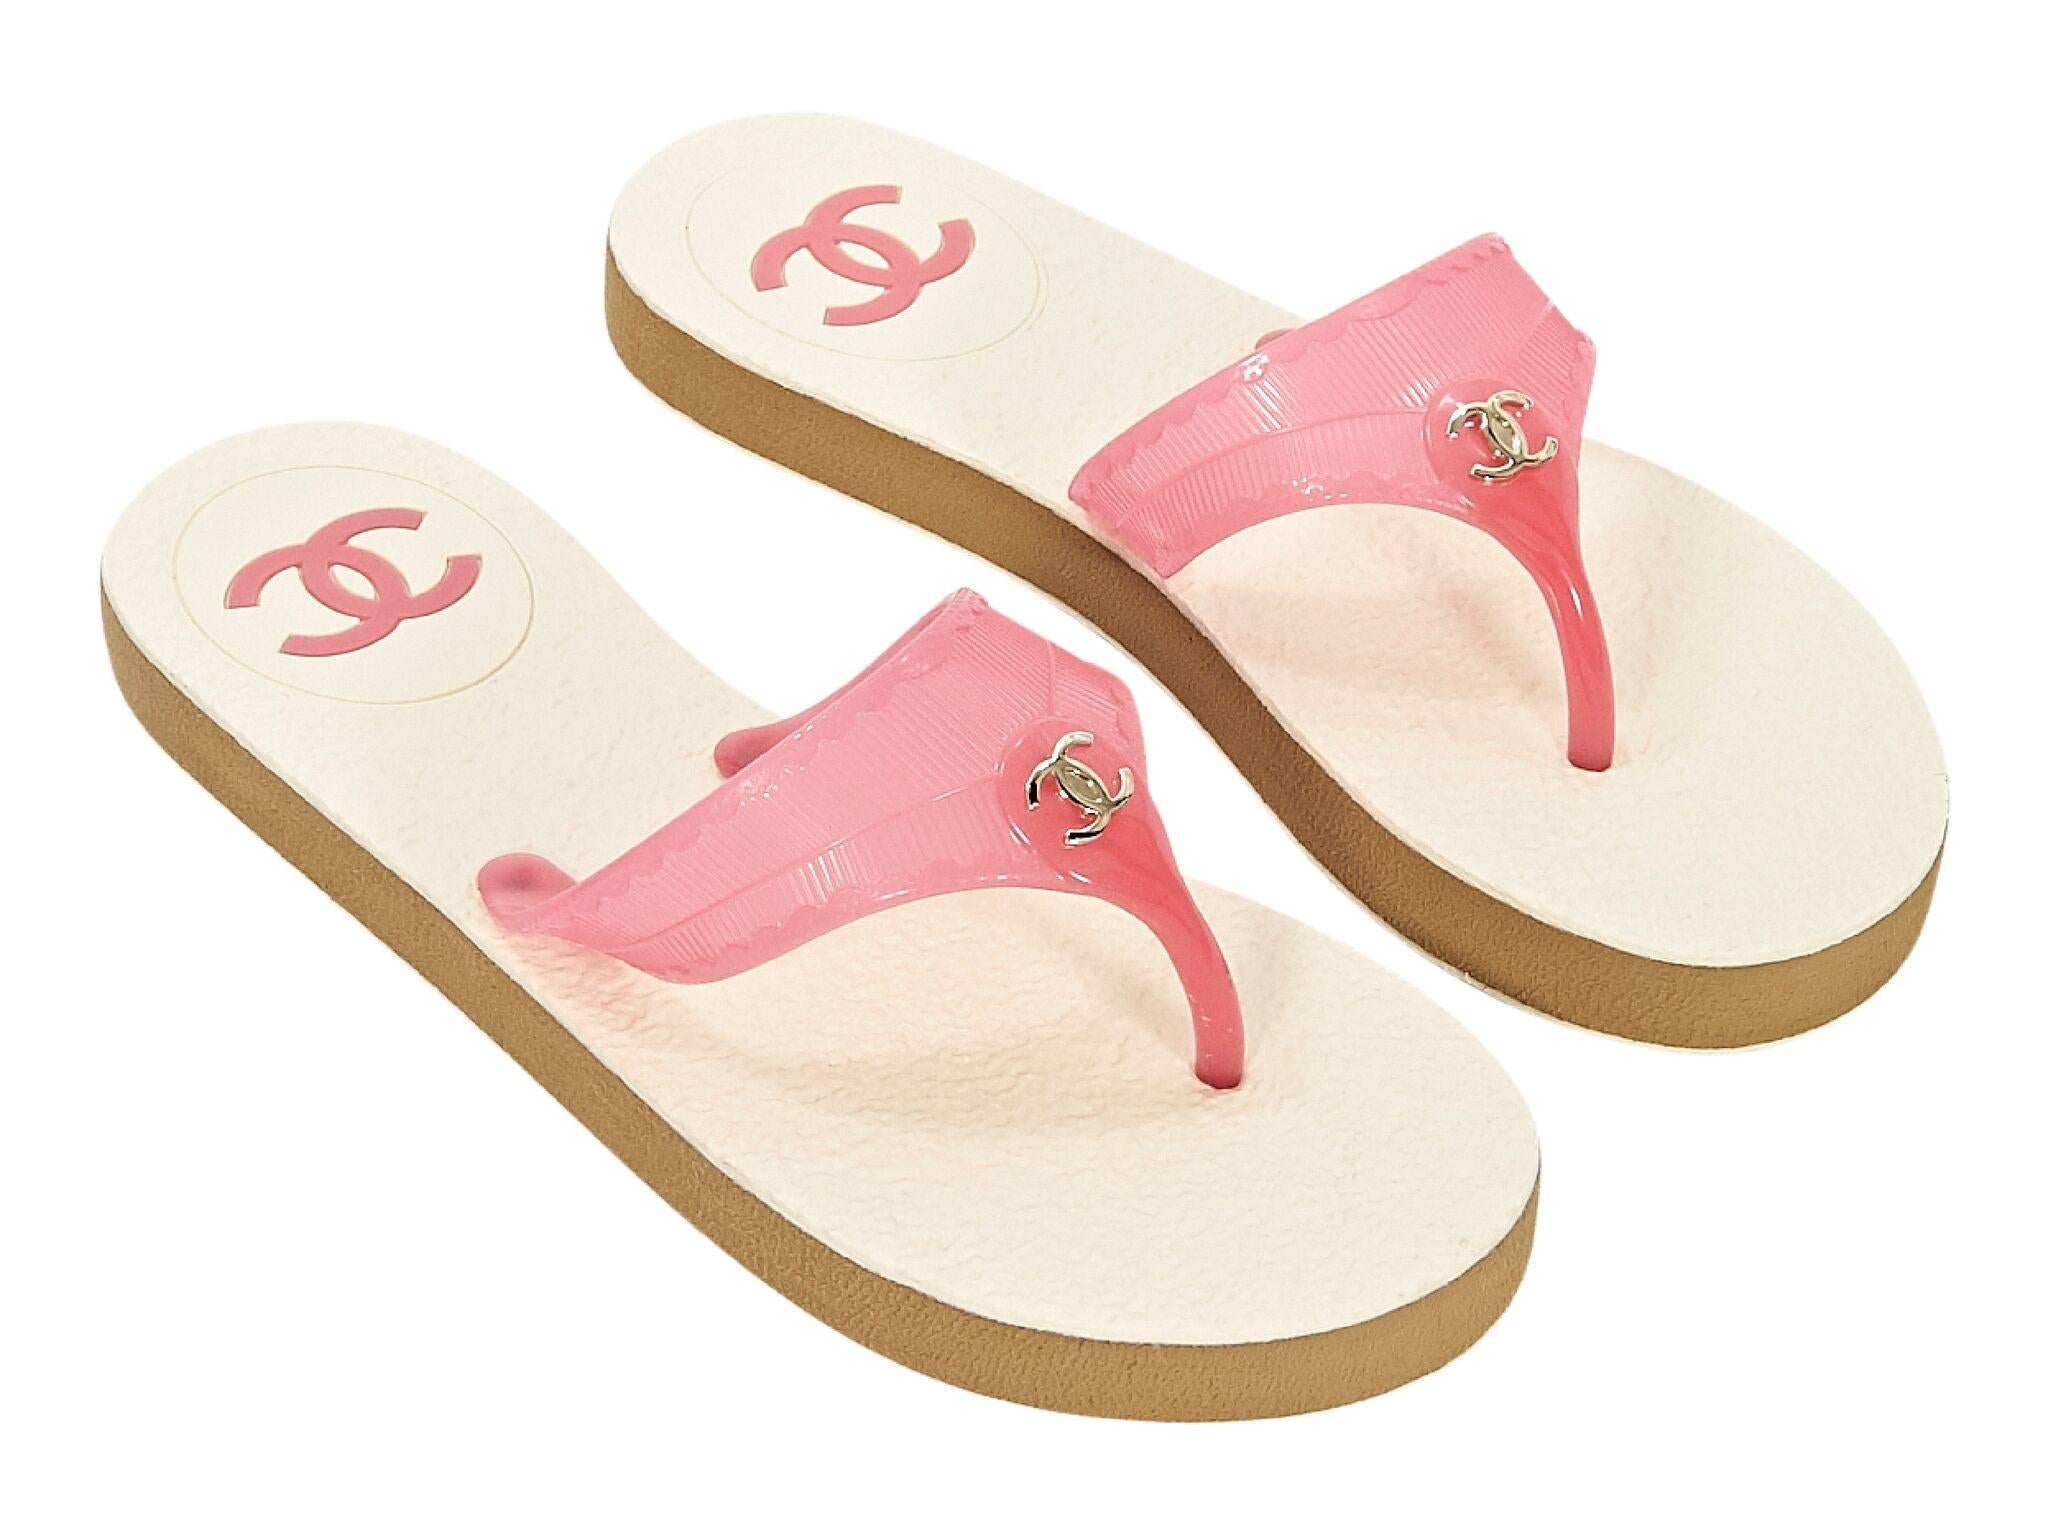 Product details:  Pink thong sandals by Chanel.  Slip-on style.
Condition: Pre-owned. Never worn. 
Est. Retail $915